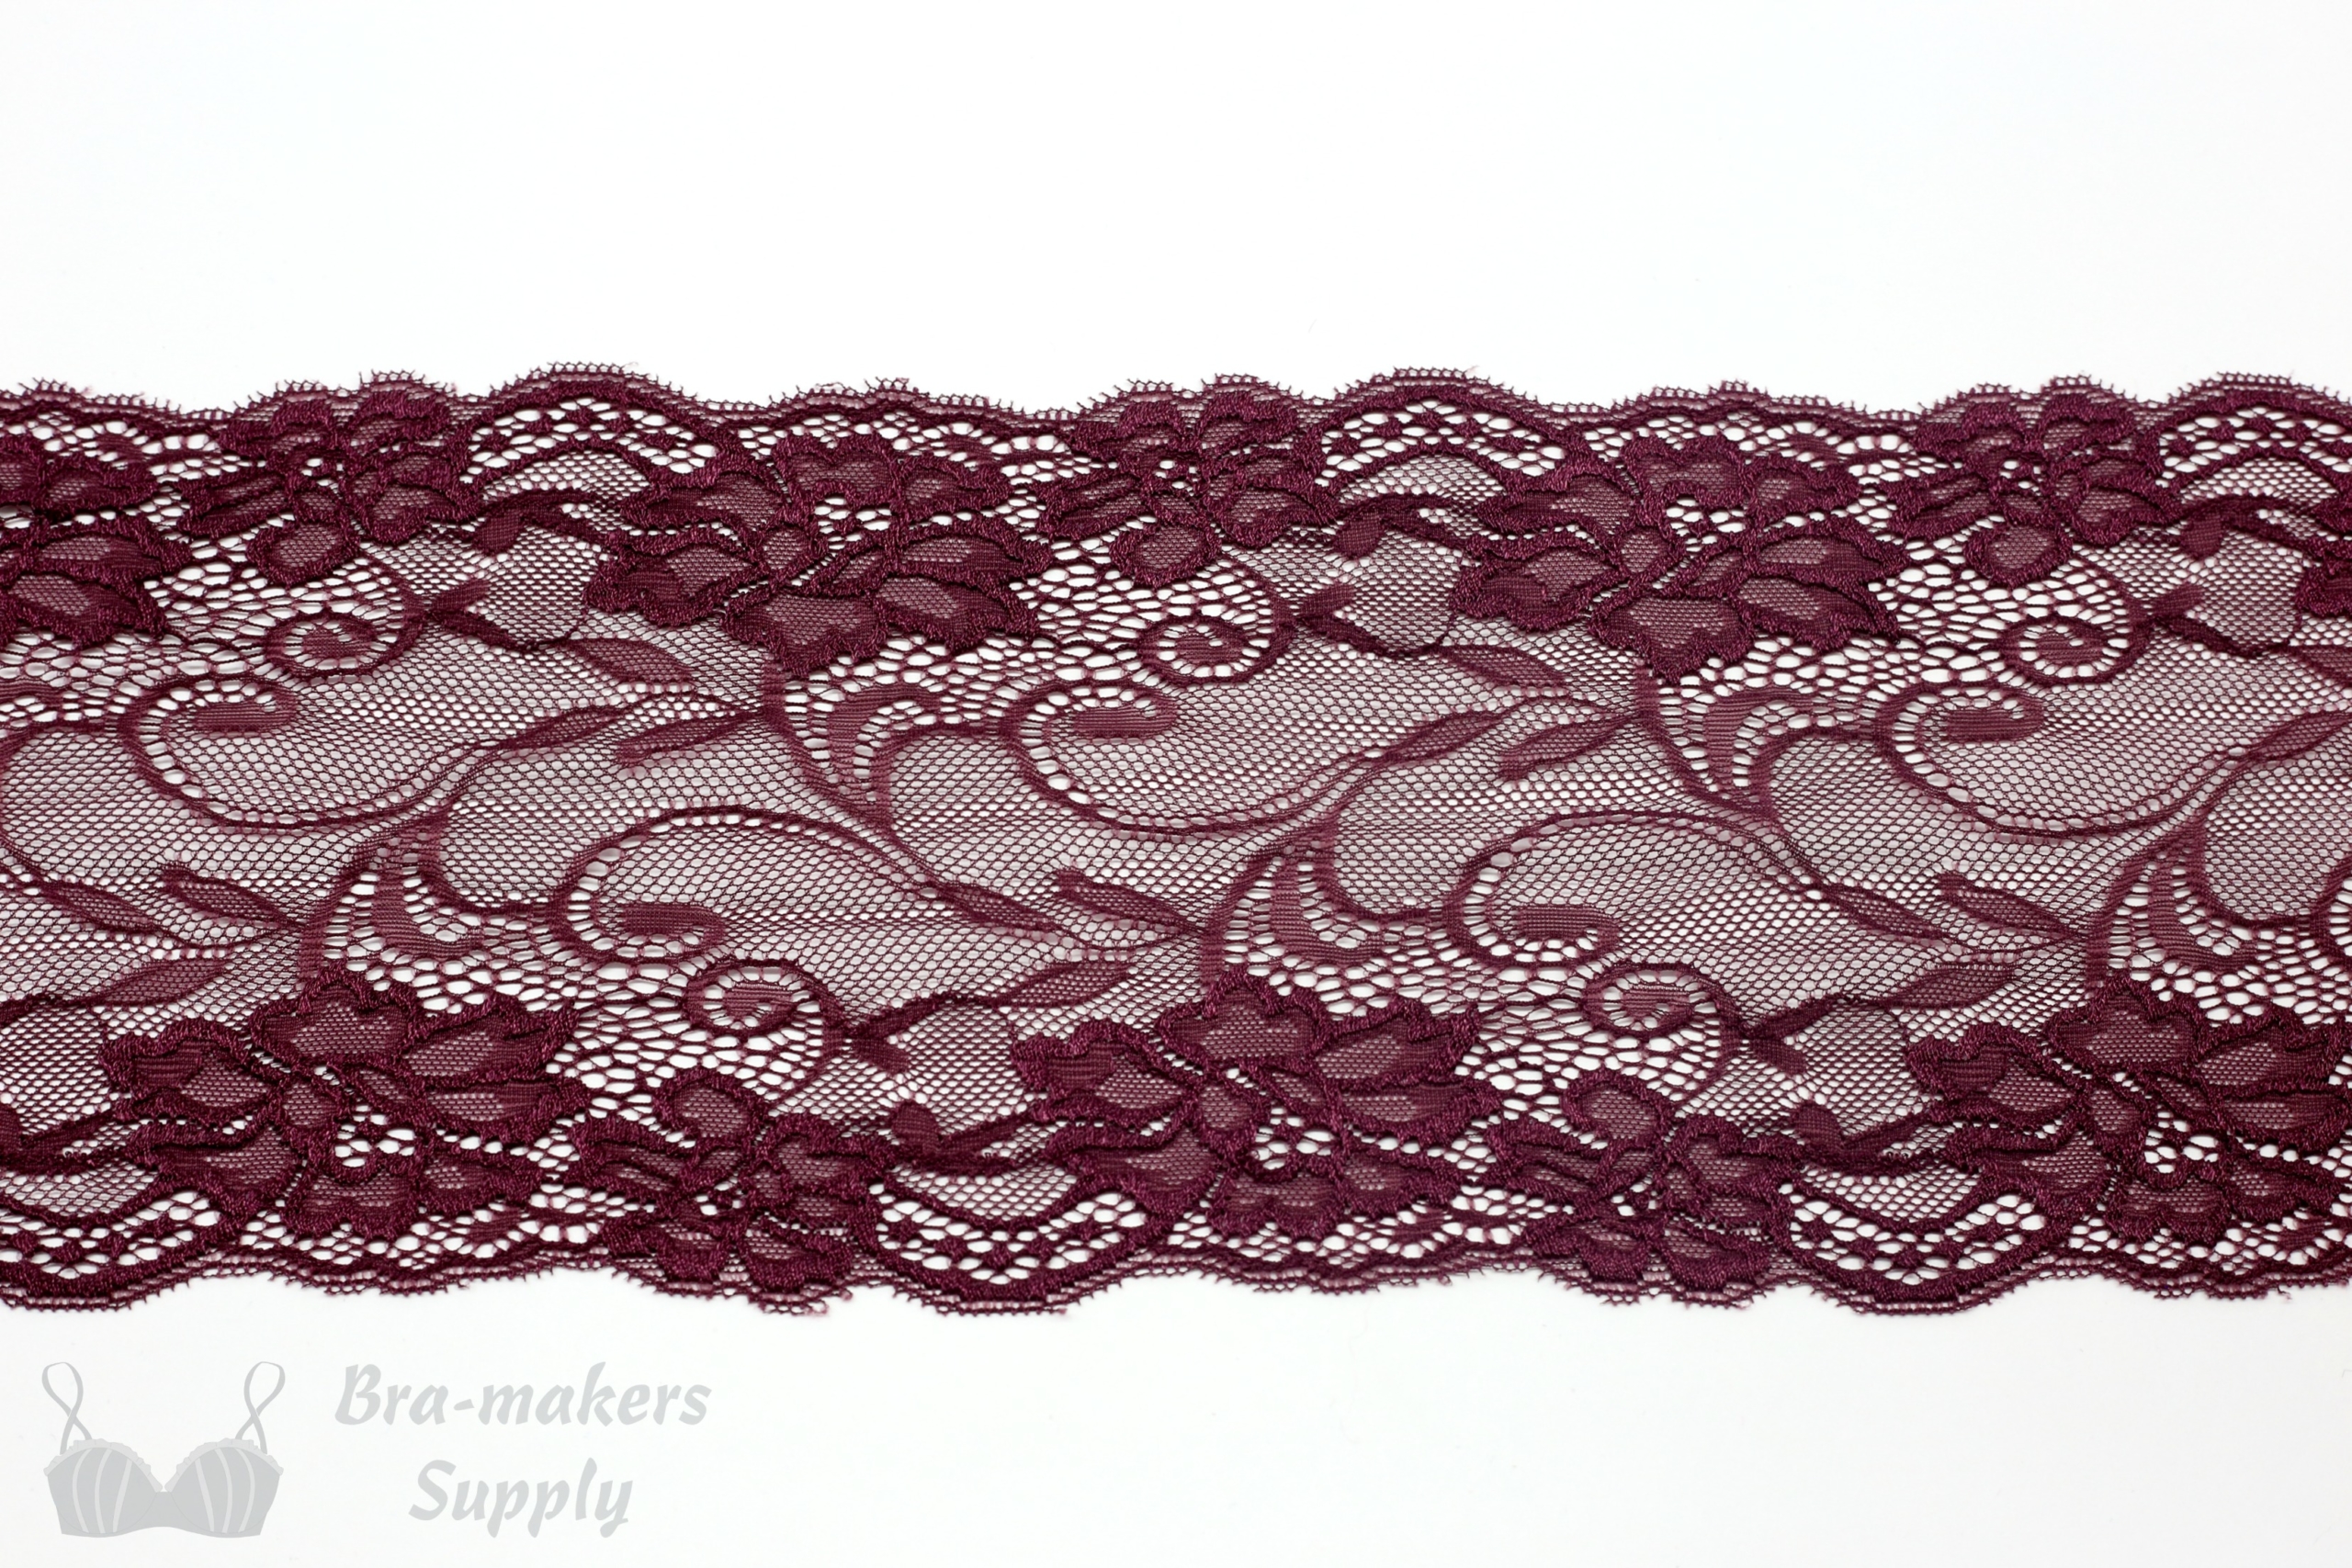 Six Inch Black Cherry Floral Stretch Lace - Bra-Makers Supply